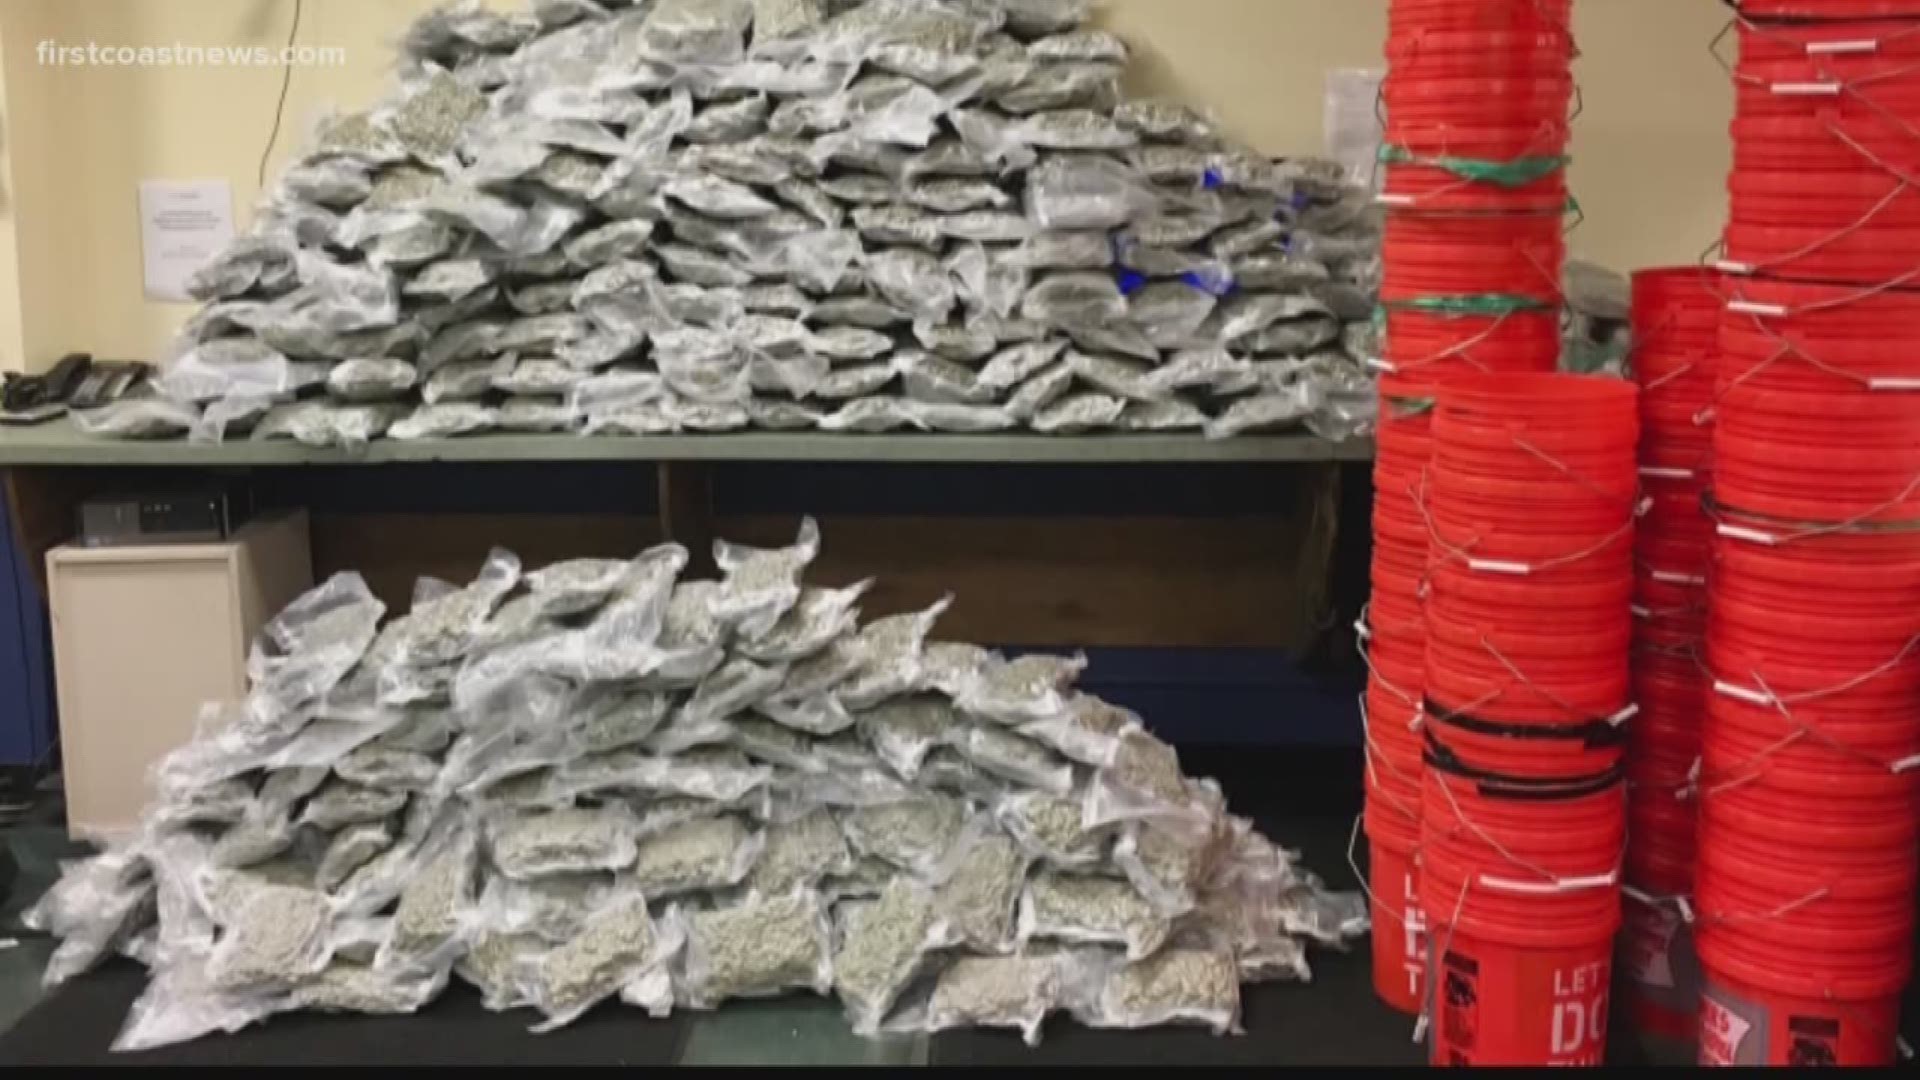 Six people were arrested during "Operation Going Back to Cali" in which JSO seized almost 500 pounds worth of marijuana shipped from California to Jacksonville.